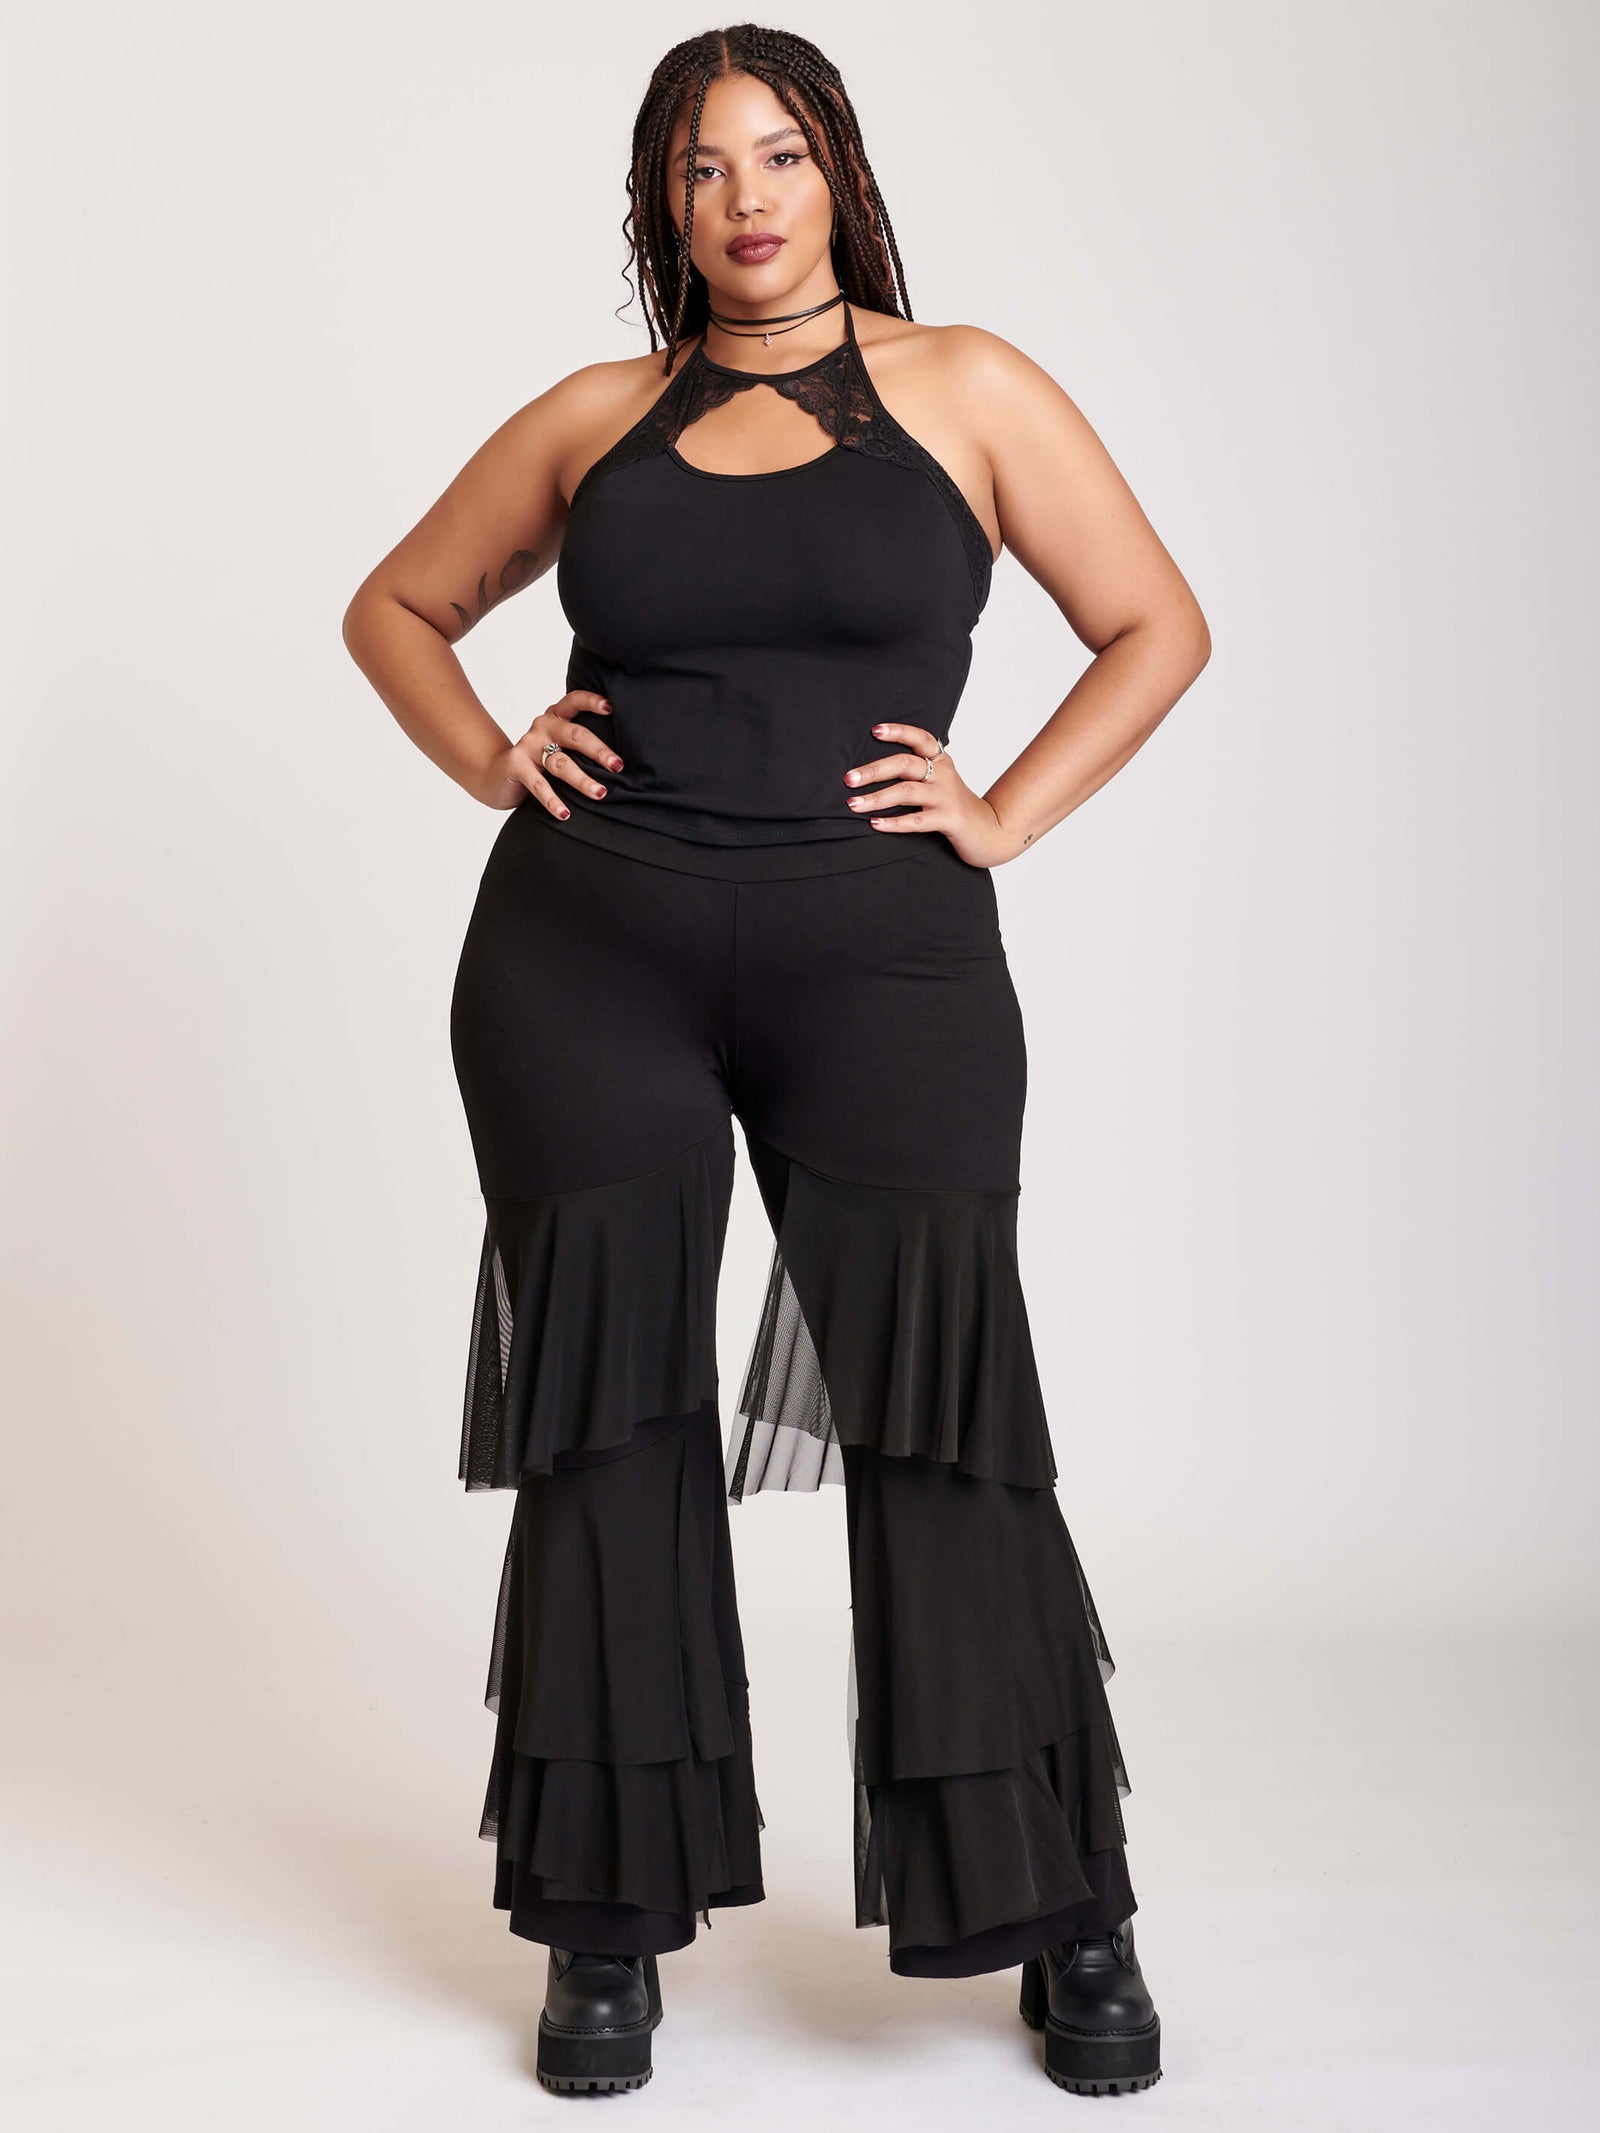 Boss Witch Take 2  Gothic outfits, Plus size fashion, Plus size